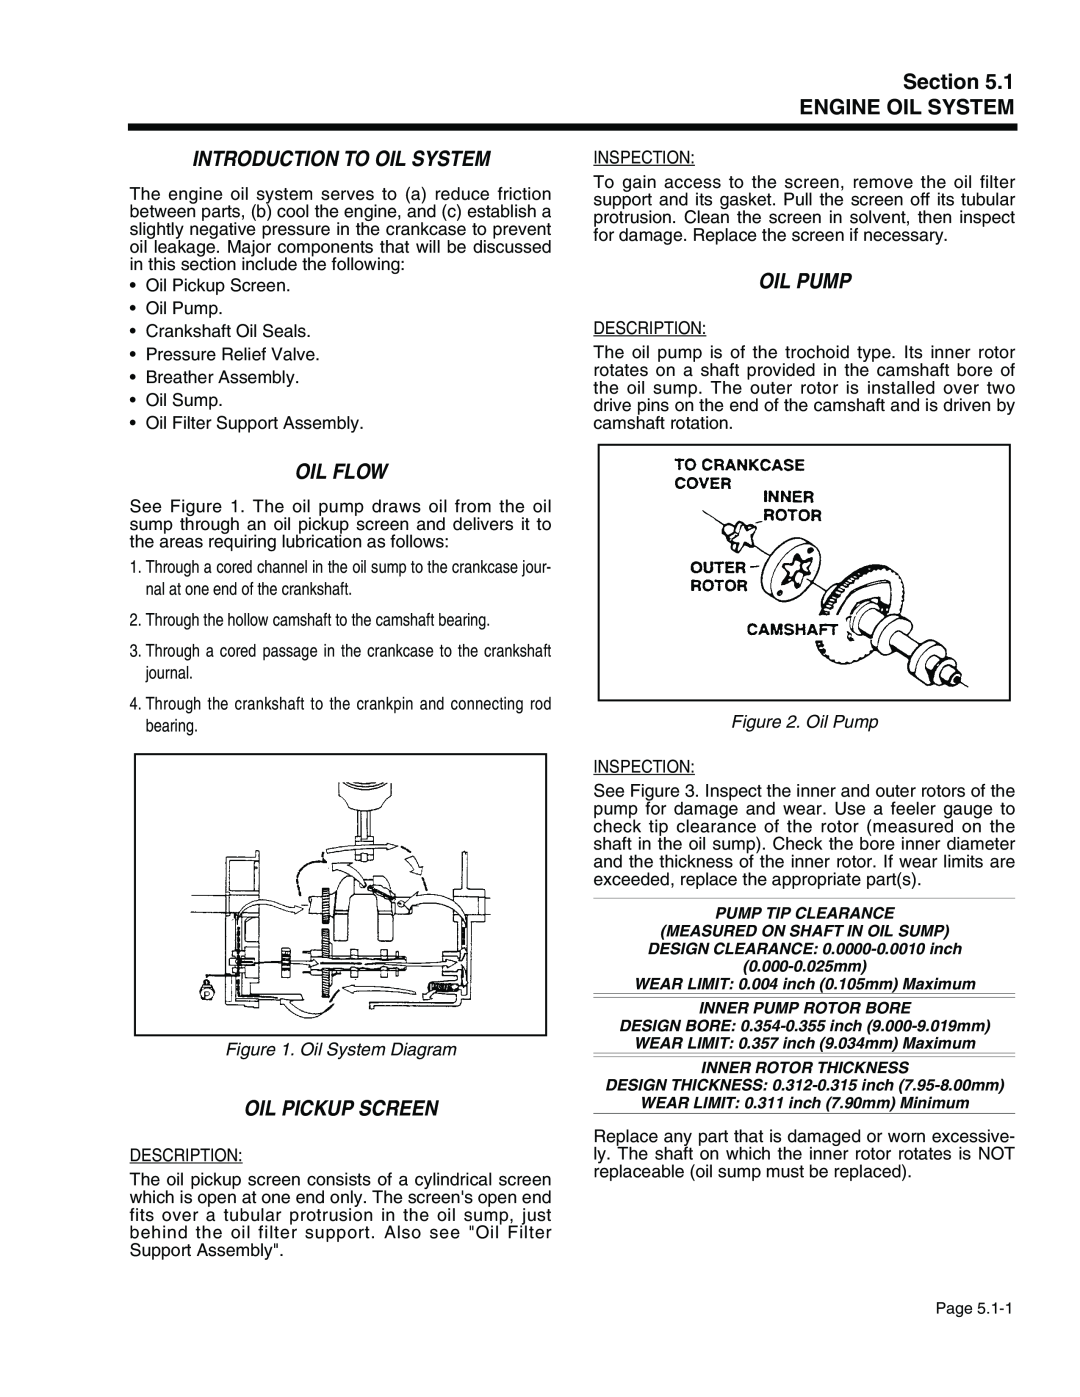 Generac Power Systems 941-2 Section ENGINE OIL SYSTEM, Introduction To Oil System, Oil Pump, Oil Flow, Oil Pickup Screen 